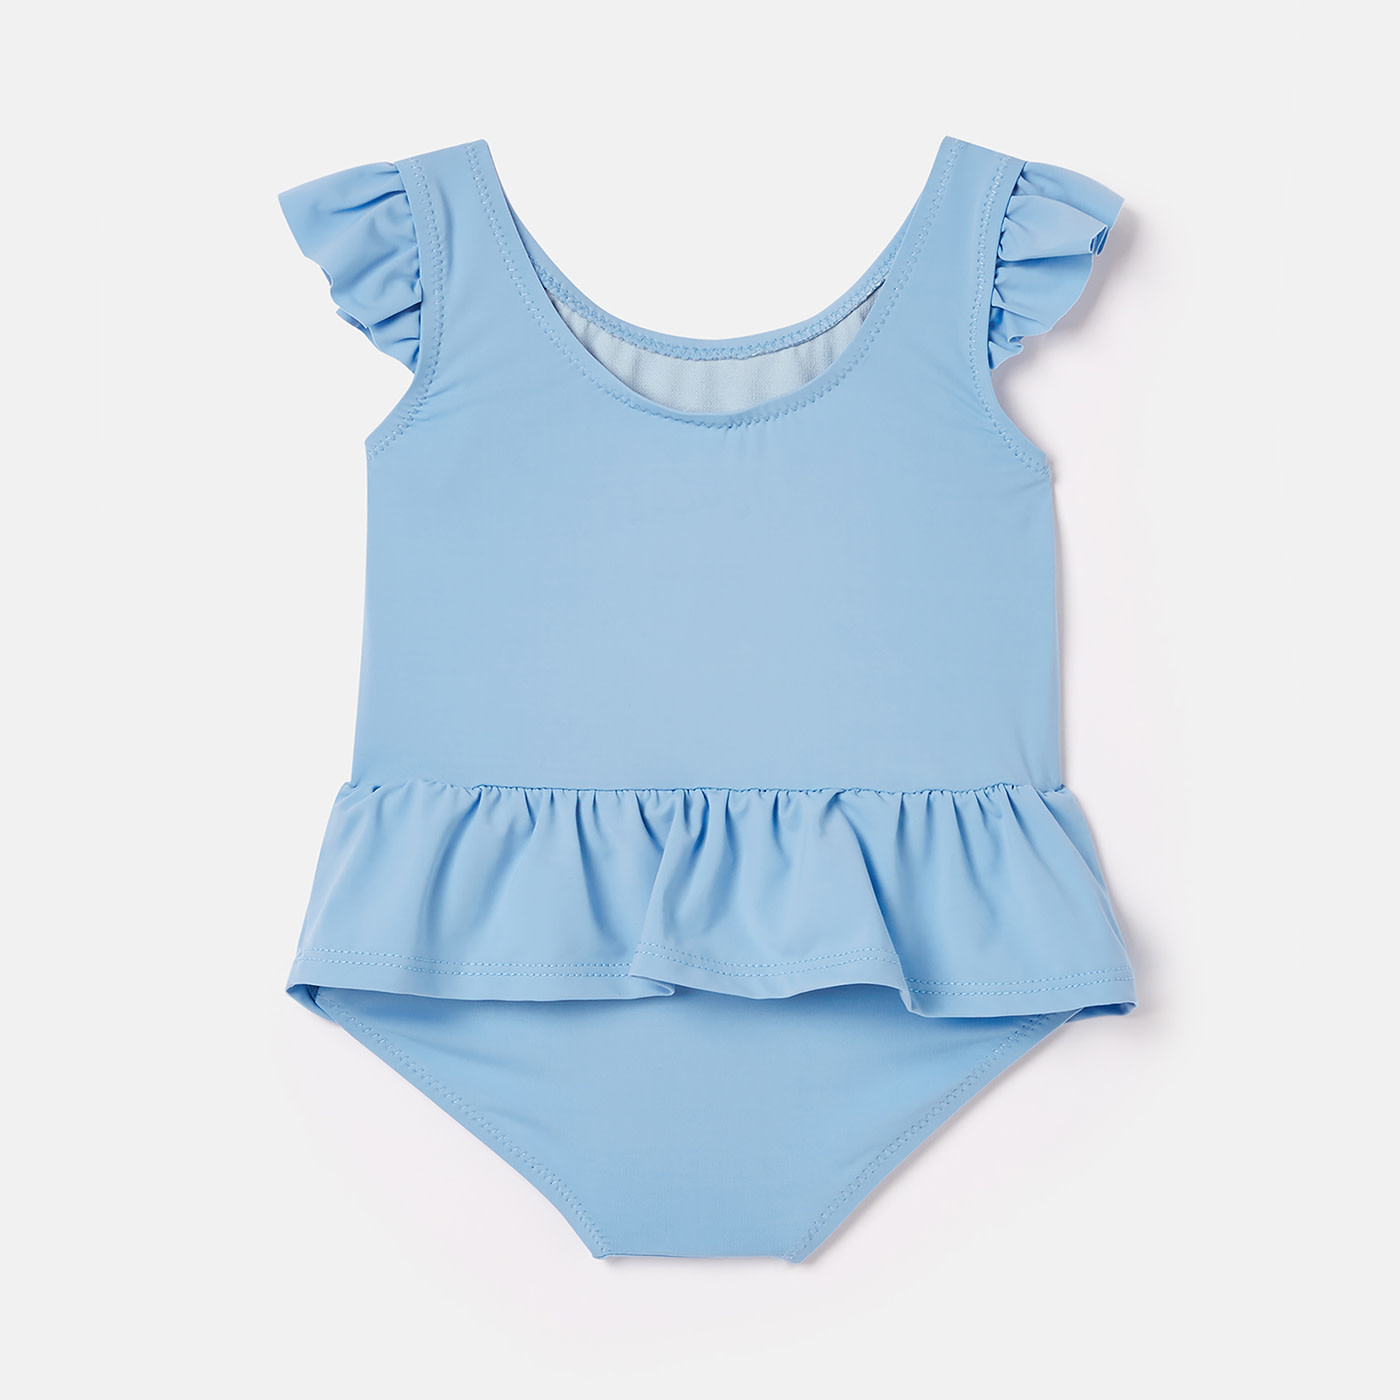 Joules Joules Girl Swimsuit